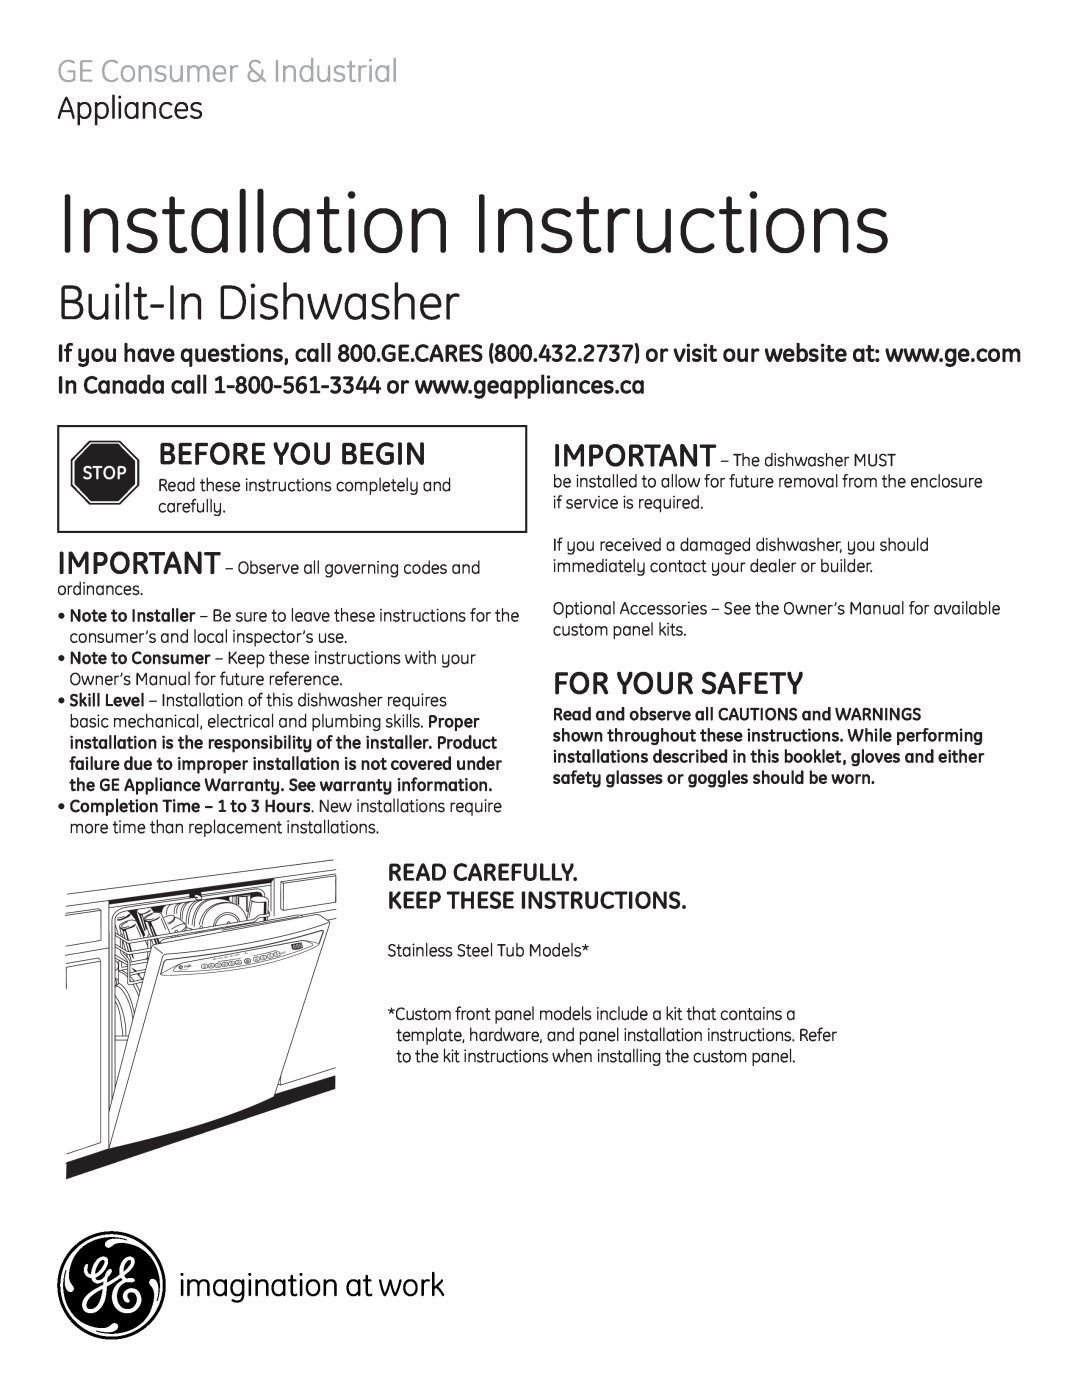 GE PDW8400JCC installation instructions Before You Begin, For Your Safety, Read Carefully Keep These Instructions, Stop 